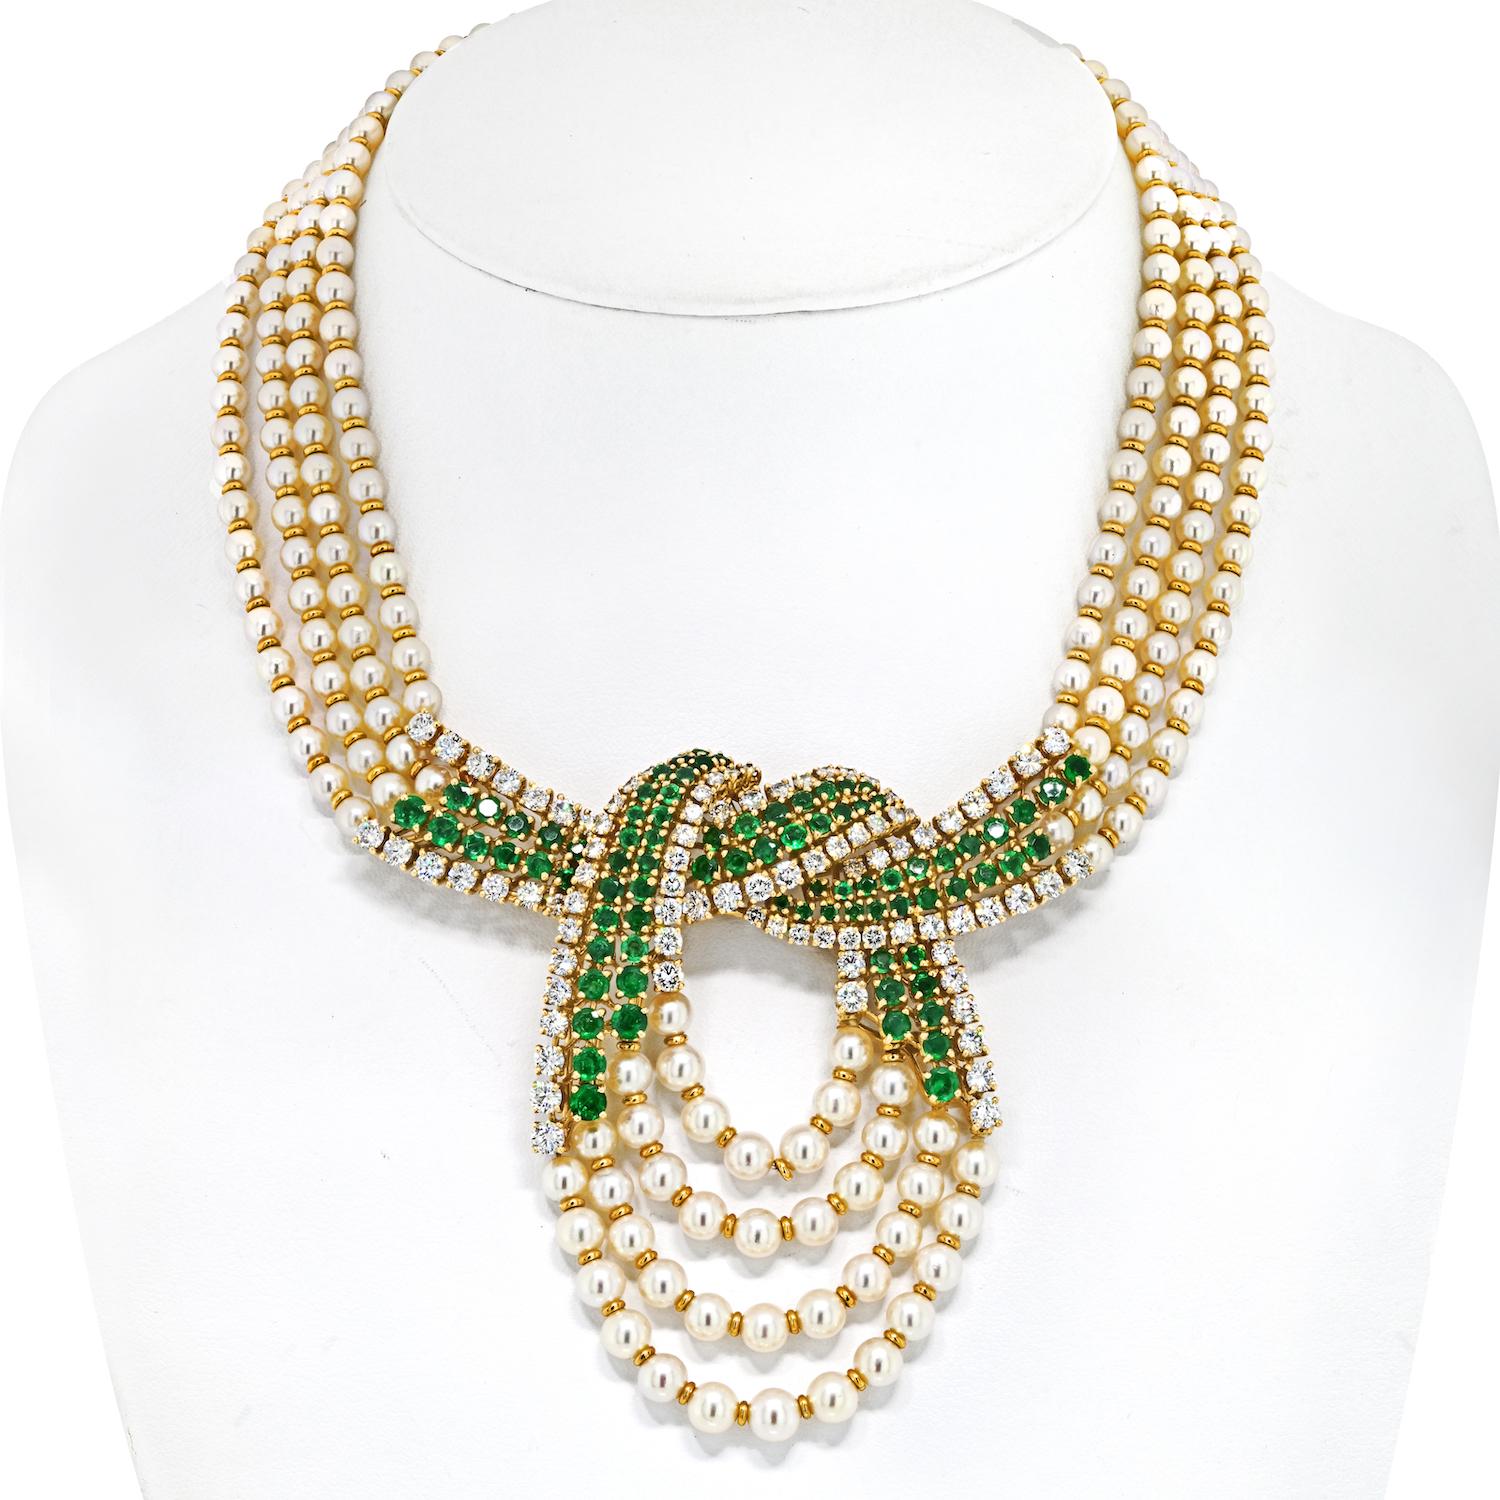 Elevate your jewelry collection with this exquisite Chaumet Platinum & 18K Yellow Gold Multi-Strand Necklace, adorned with an opulent array of diamonds, emeralds, and pearls. Comprising four luxurious strands, this 15-inch necklace exudes timeless